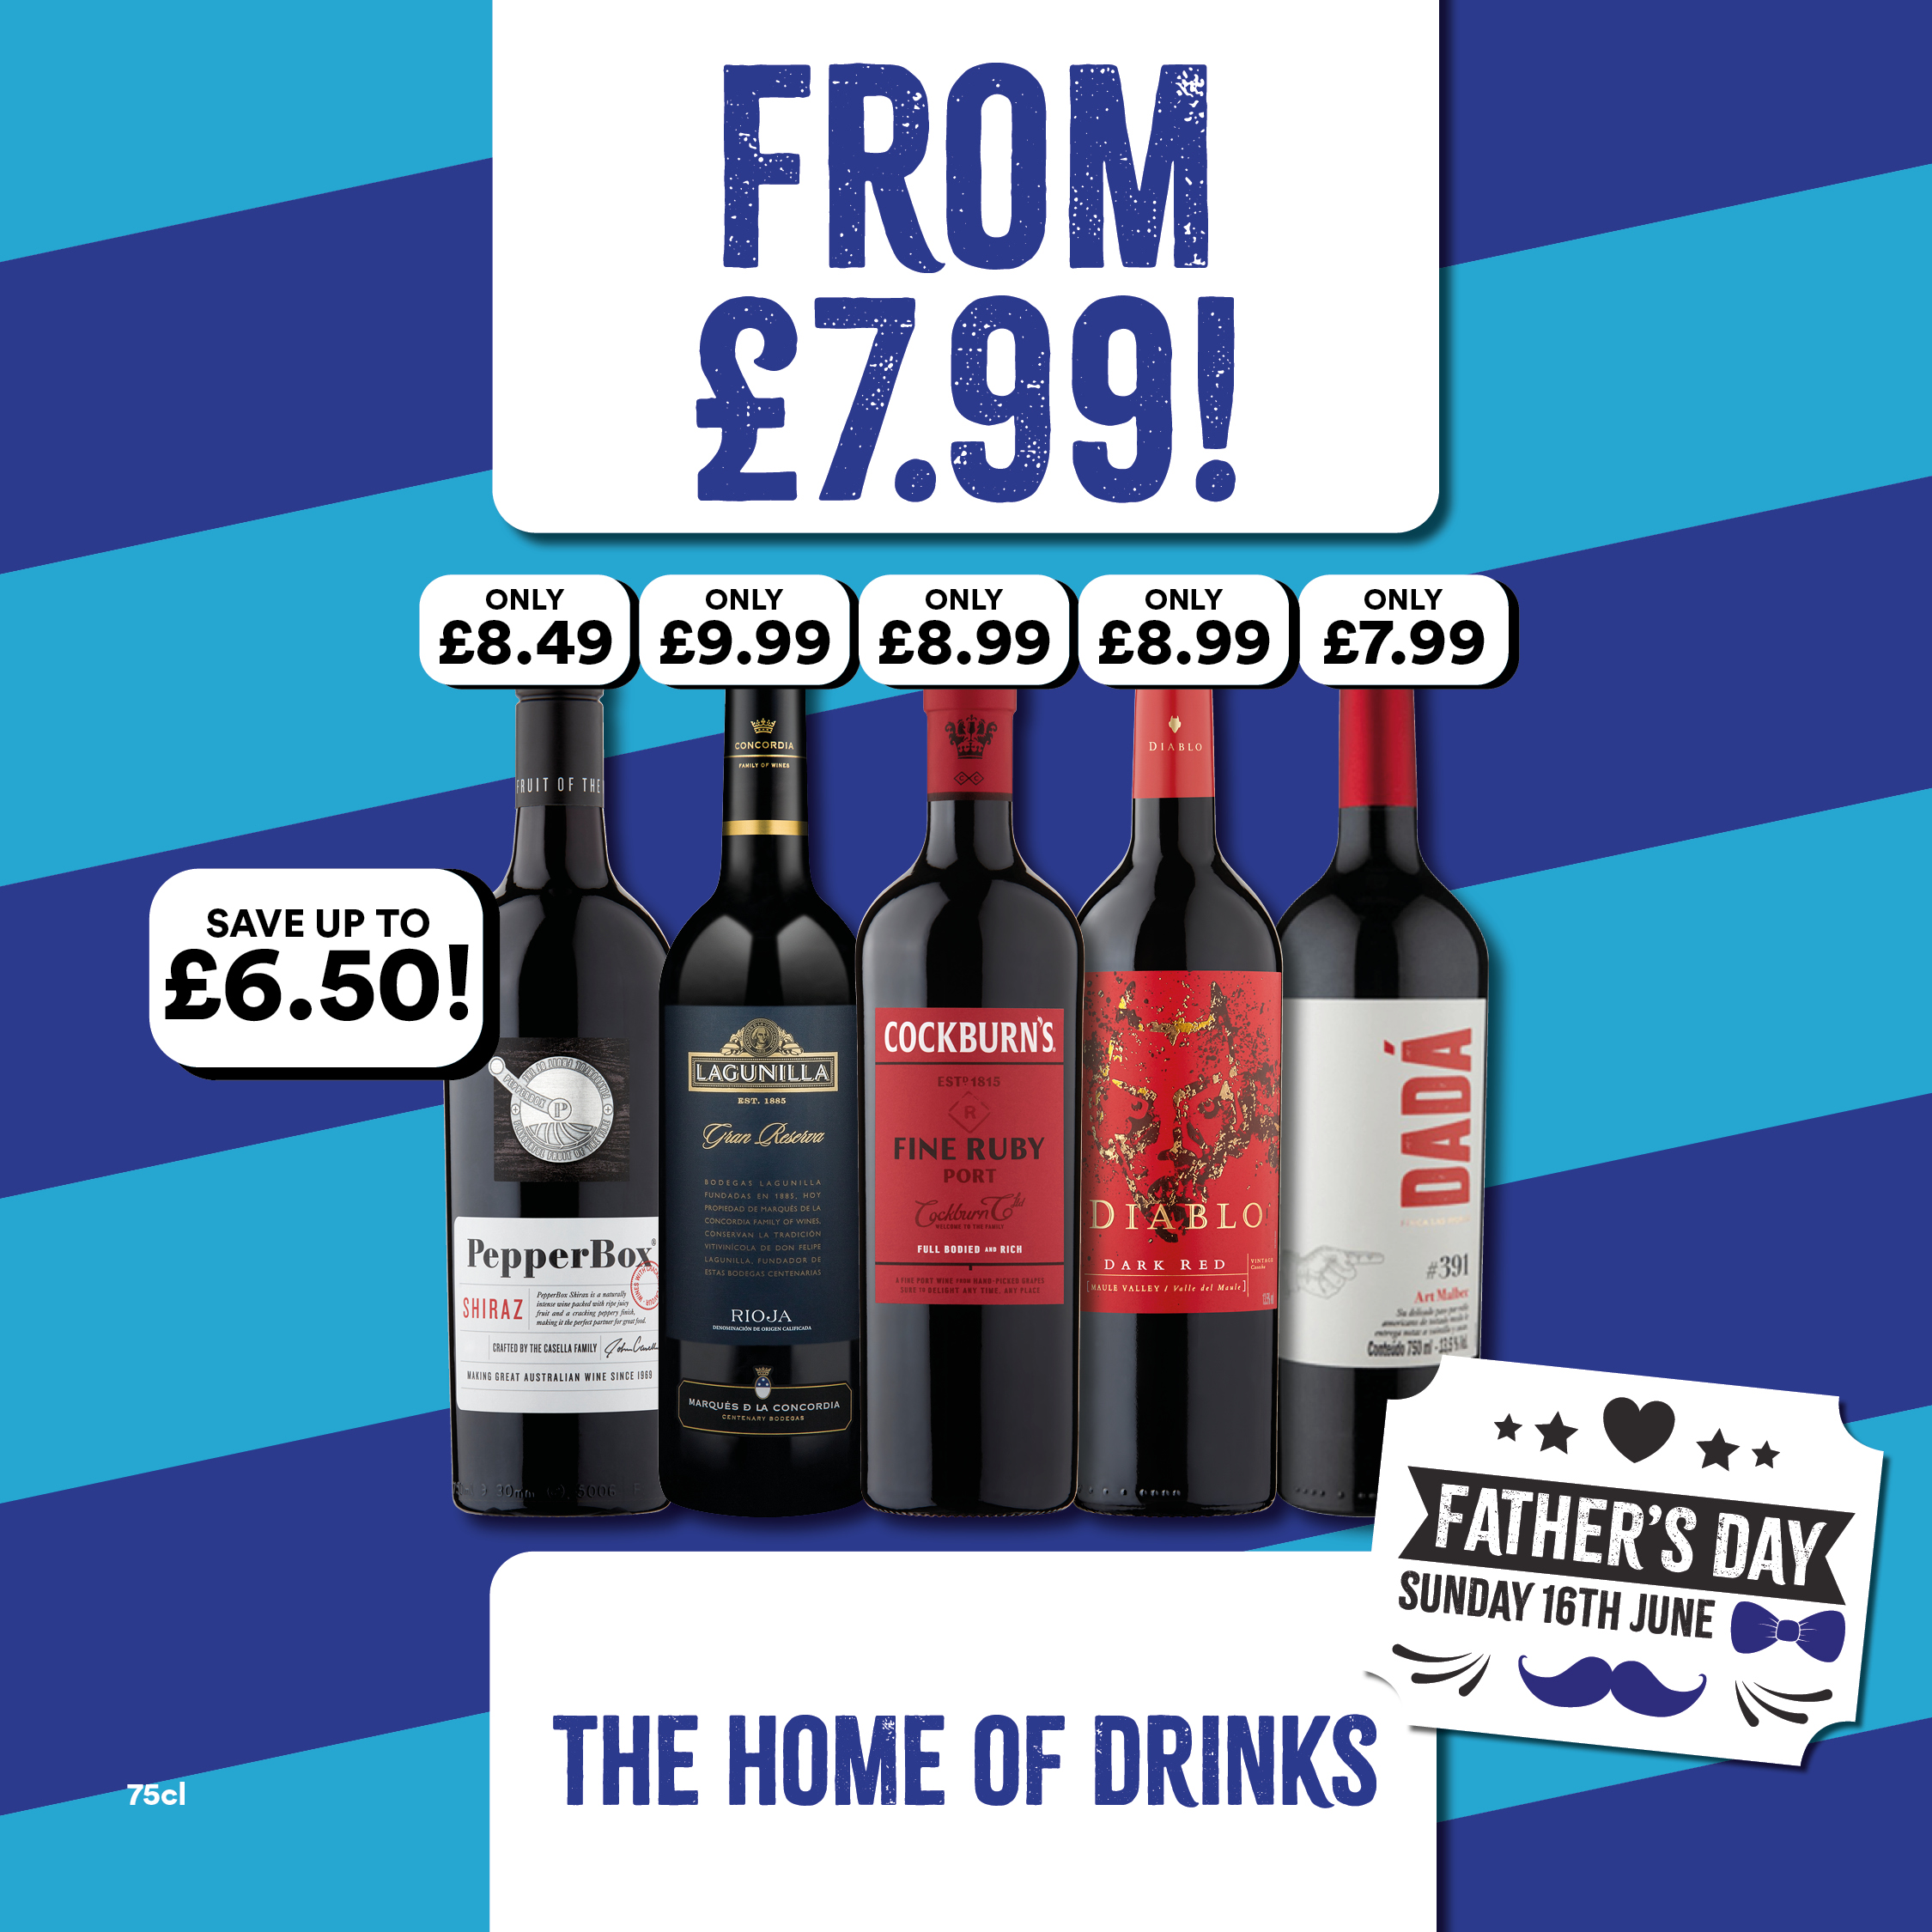 From £7.99 on selected wines BARGAIN BOOZE Wigan 01942 825545